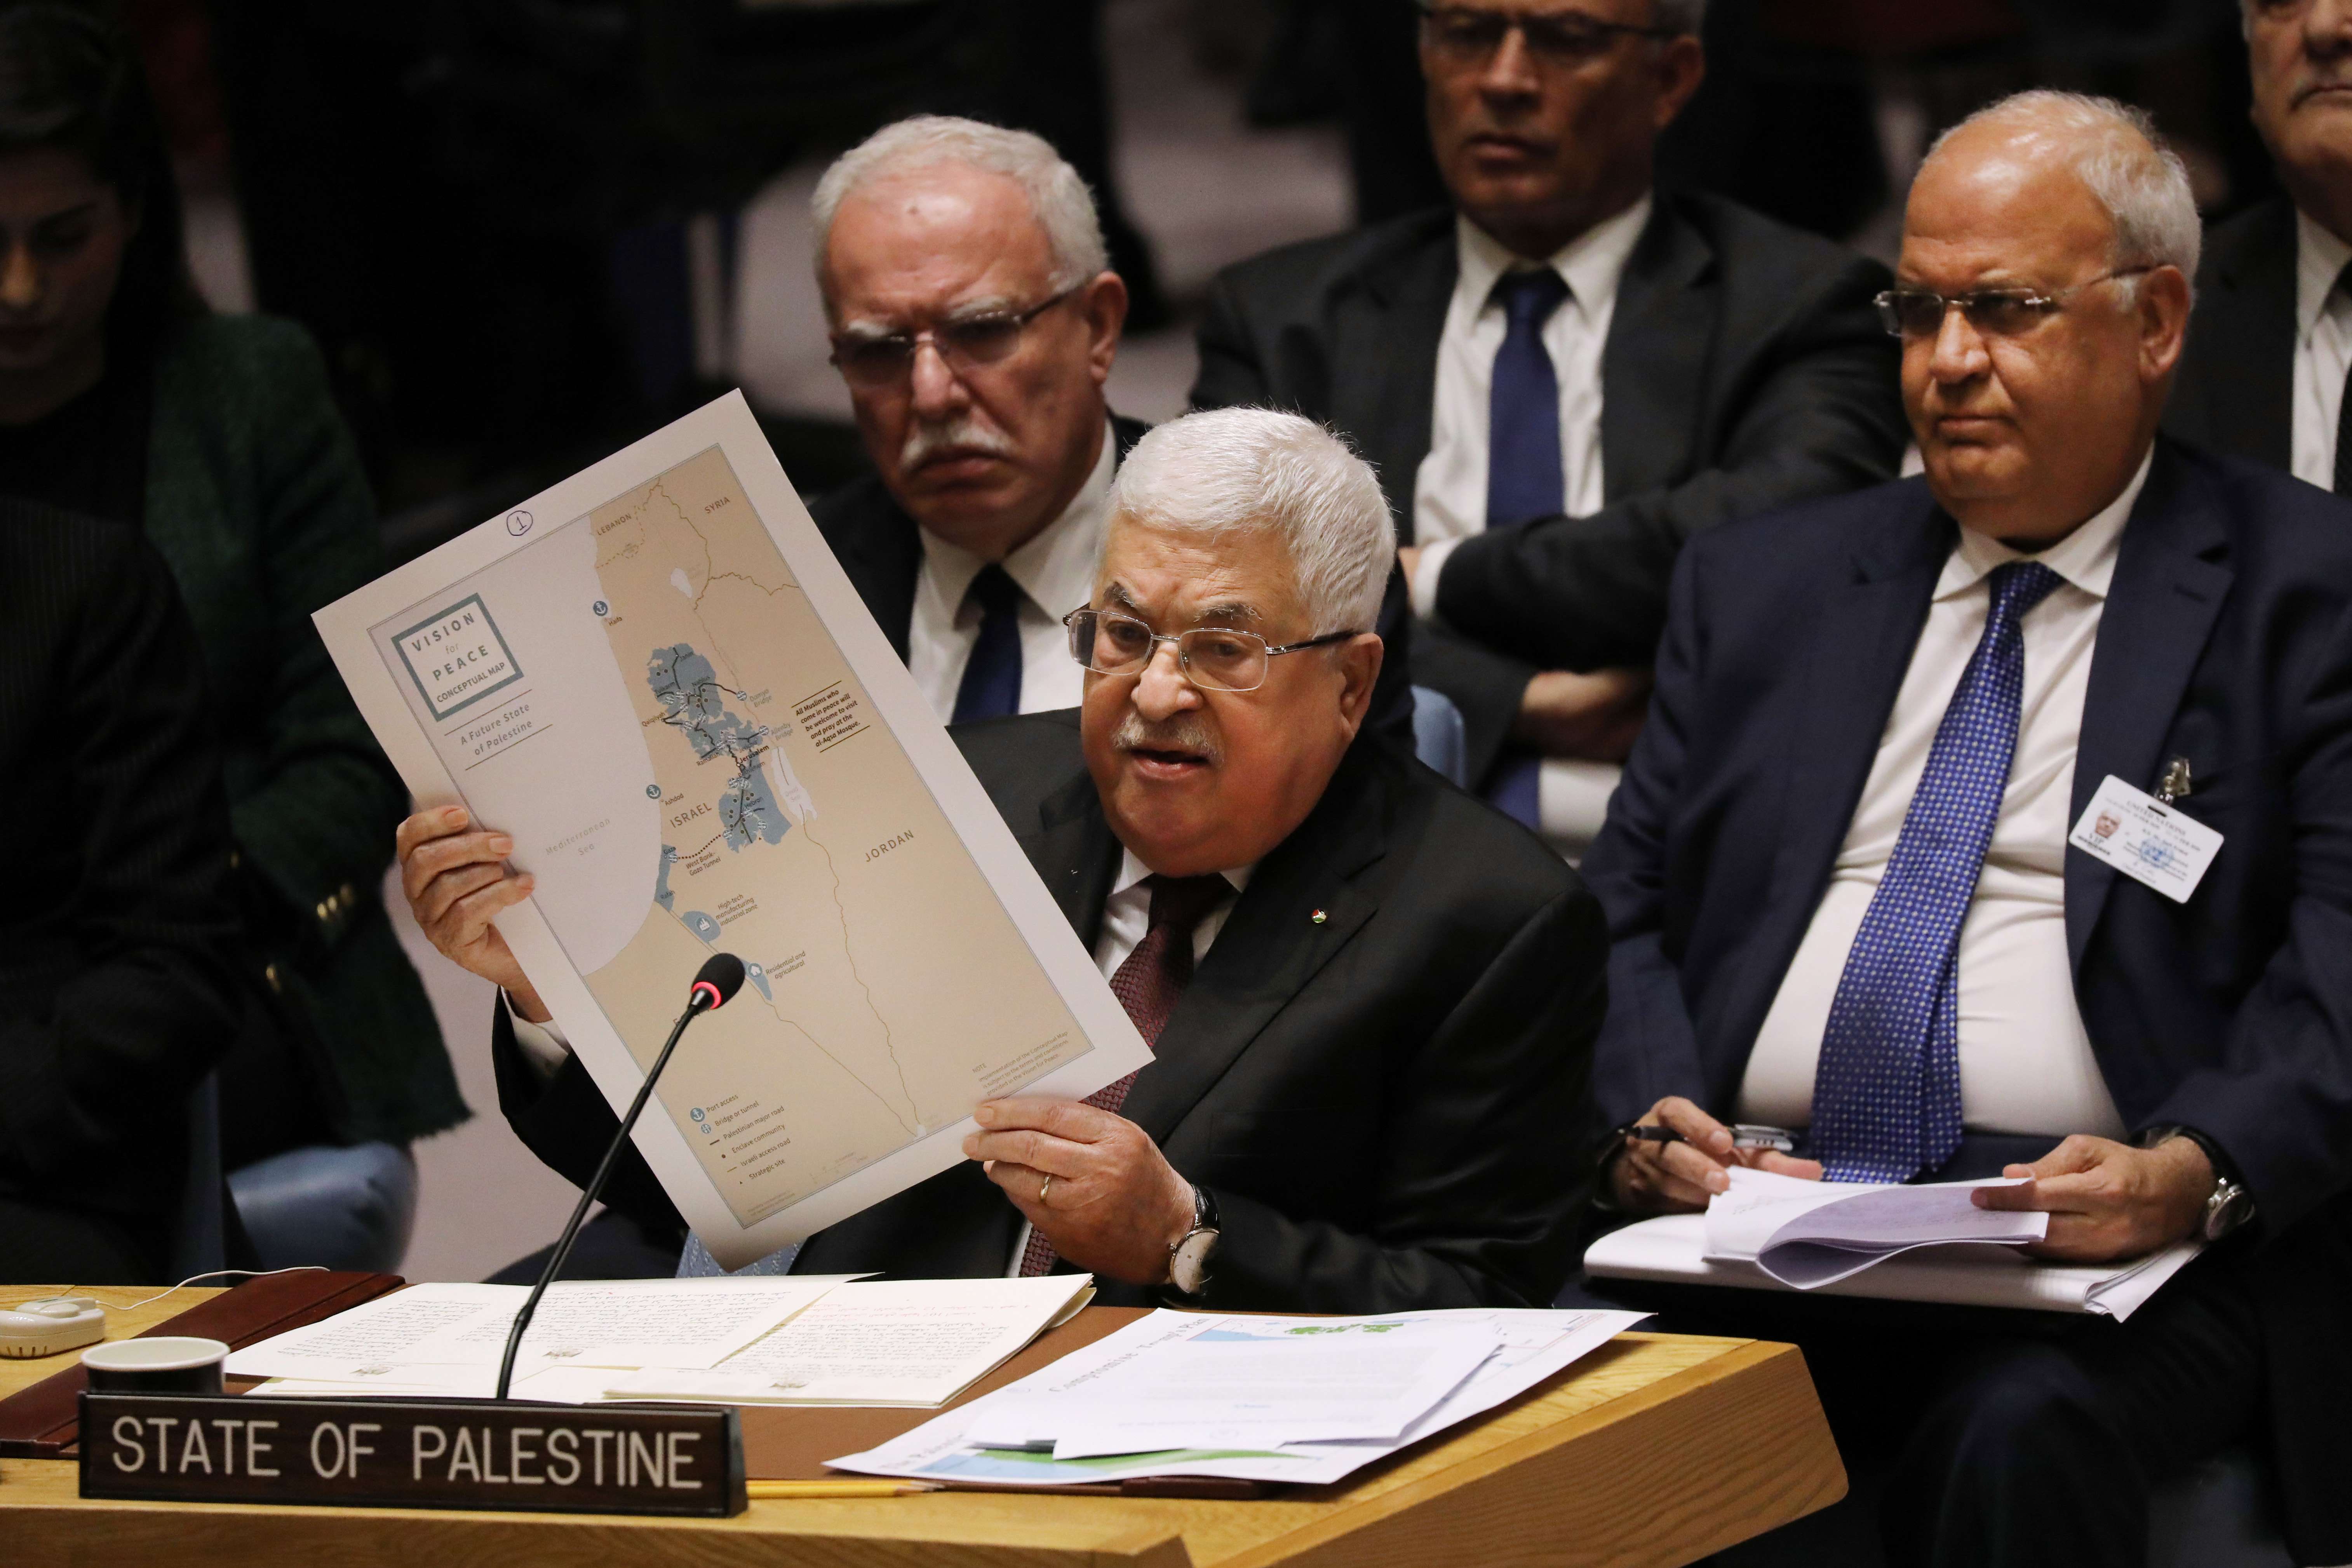 NEW YORK, NEW YORK - FEBRUARY 11: Palestinian President Mahmoud Abbas holds up a Vision for Peace map while speaking at the United Nations (UN) Security Council on February 11, 2020 in New York City. Abbas used the world body to denounce the US peace plan between Israel and Palestine. Donald Trump's proposal for Israeli-Palestinian peace, which was released on January 28, has been met with universal Palestinian opposition.   Spencer Platt/Getty Images/AFPn== FOR NEWSPAPERS, INTERNET, TELCOS &amp; TELEVISION USE ONLY ==